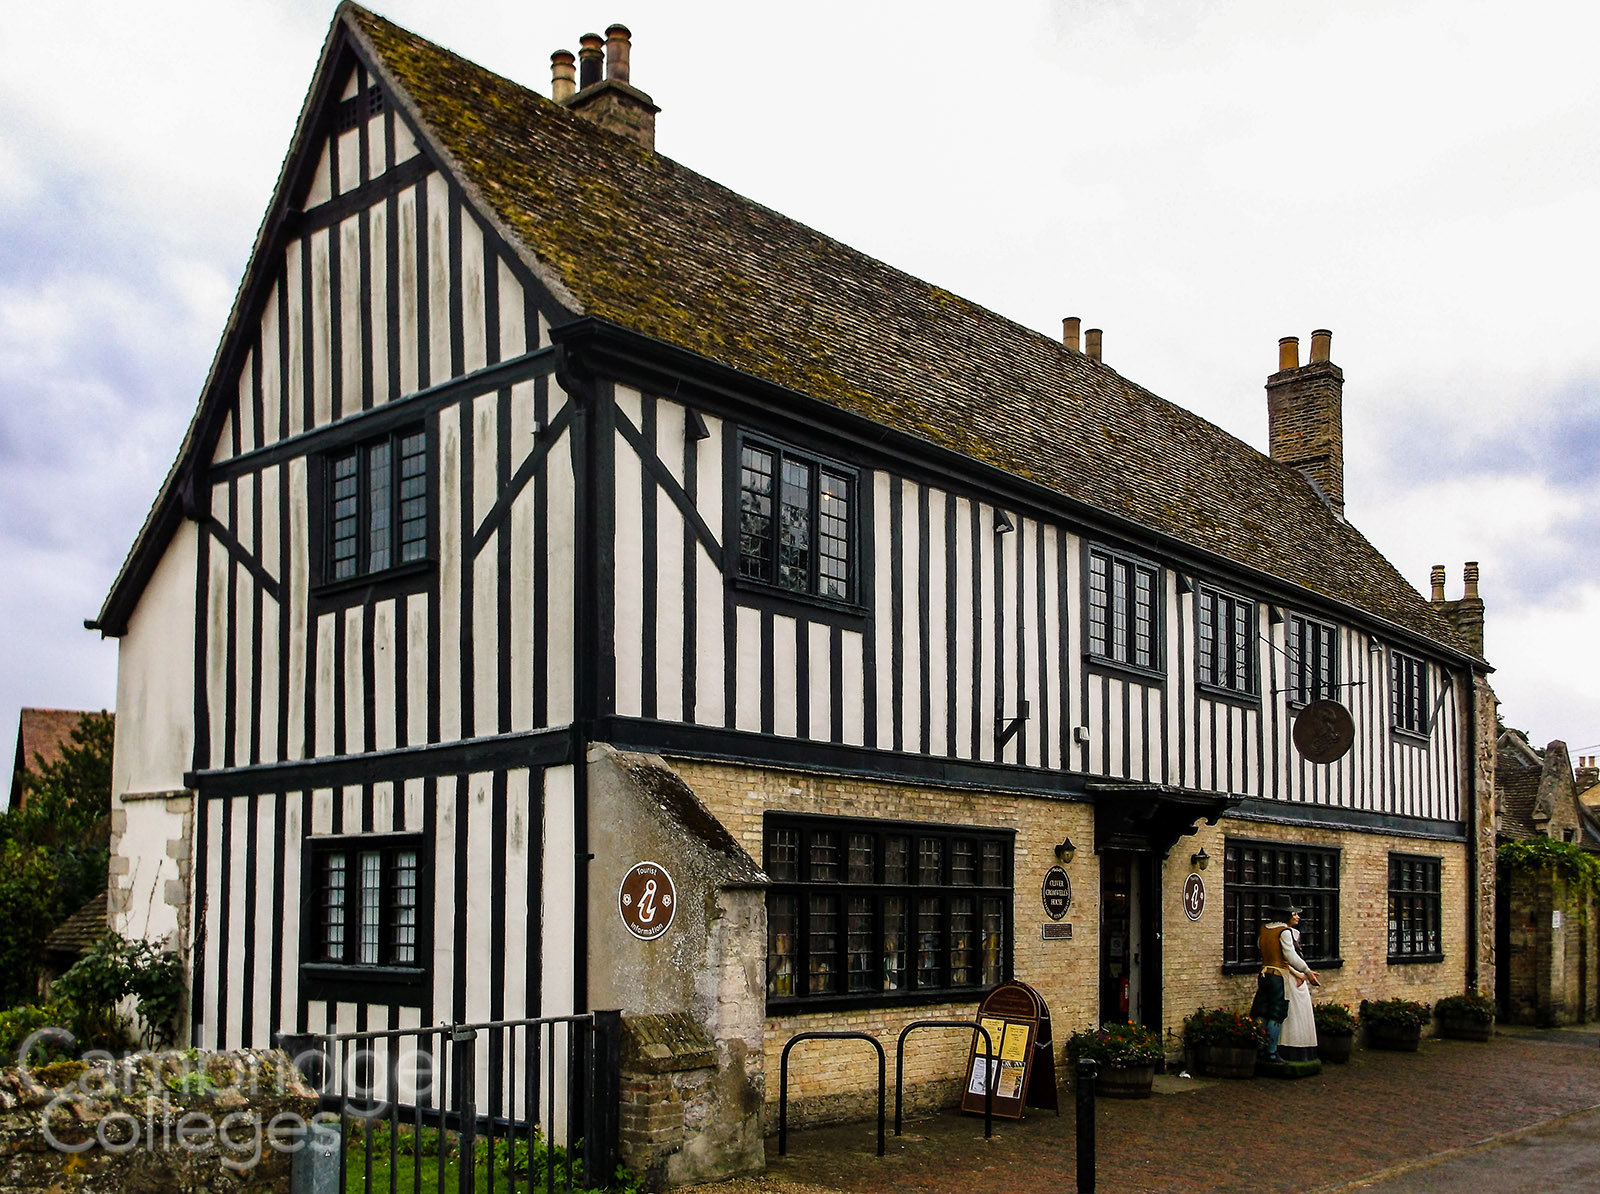 Oliver Cromwell's House in Ely photo by Harry Mitchell (Own work) [CC BY-SA 3.0 (https://creativecommons.org/licenses/by-sa/3.0)], via Wikimedia Commons